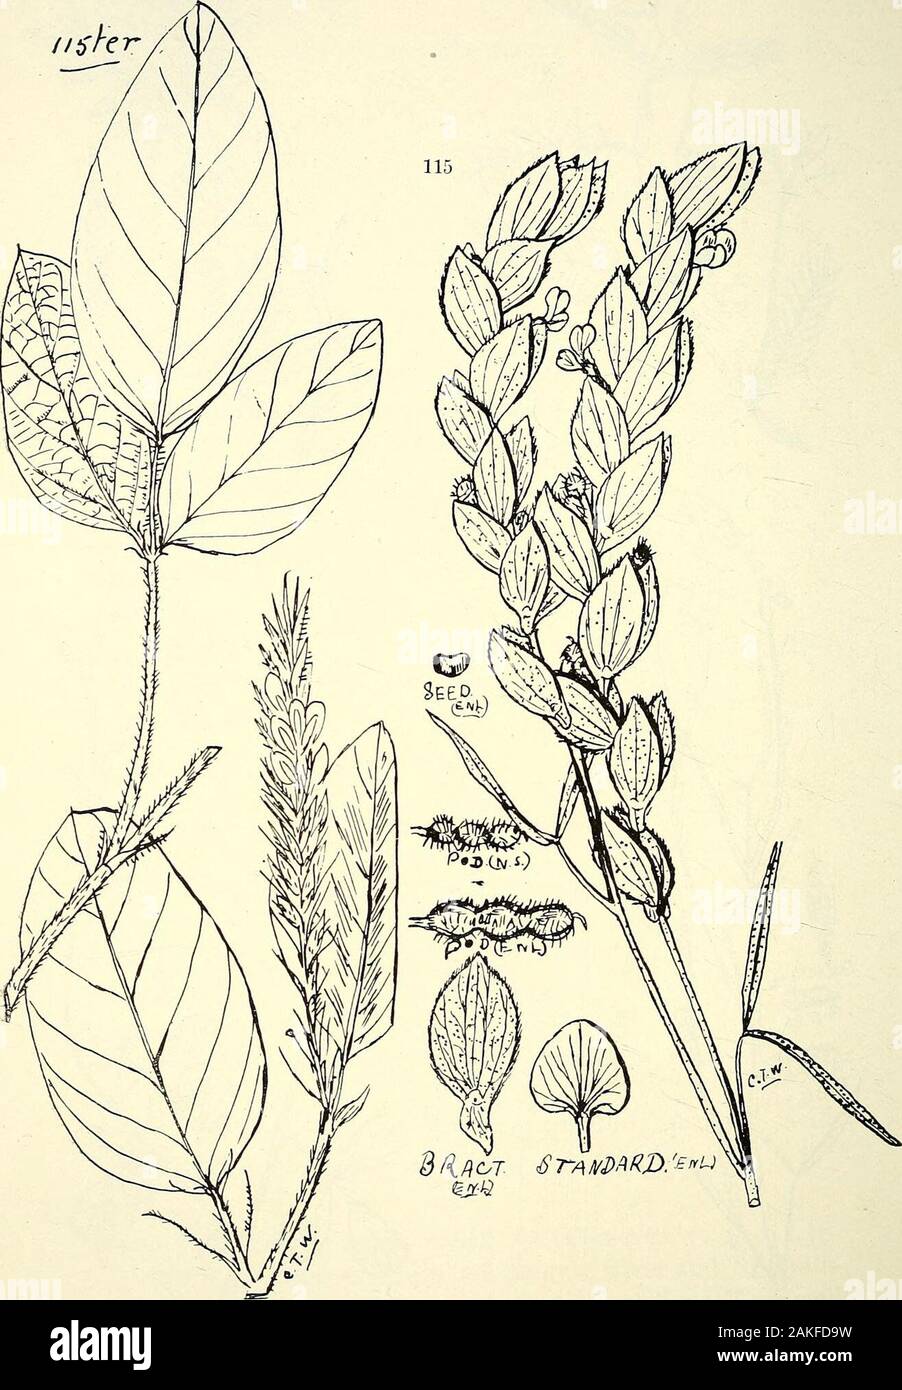 Comprehensive catalogue of Queensland plants, both indigenous and naturalisedTo which are added, where known, the aboriginal and other vernacular names; with numerous illustrations, and copious notes on the properties, features, &c., of the plants . 112. Smithia sensitiva (Ait.), DC. 113. S. geminiflora (Roth.), DC, var. conferta, Baker. 114. Zornia diphylla, Pers., var. filifolia, Bail.11^ bis. Desmodium trichostachyum, Benih. 142 XLIII. LEGUMINOS^:.. 115. Zoenia diphylla, Pers,, var. Stirlixgi, Bail.ttc; ter. Uraeia cylindracea, Benth. PLATE V. Stock Photo